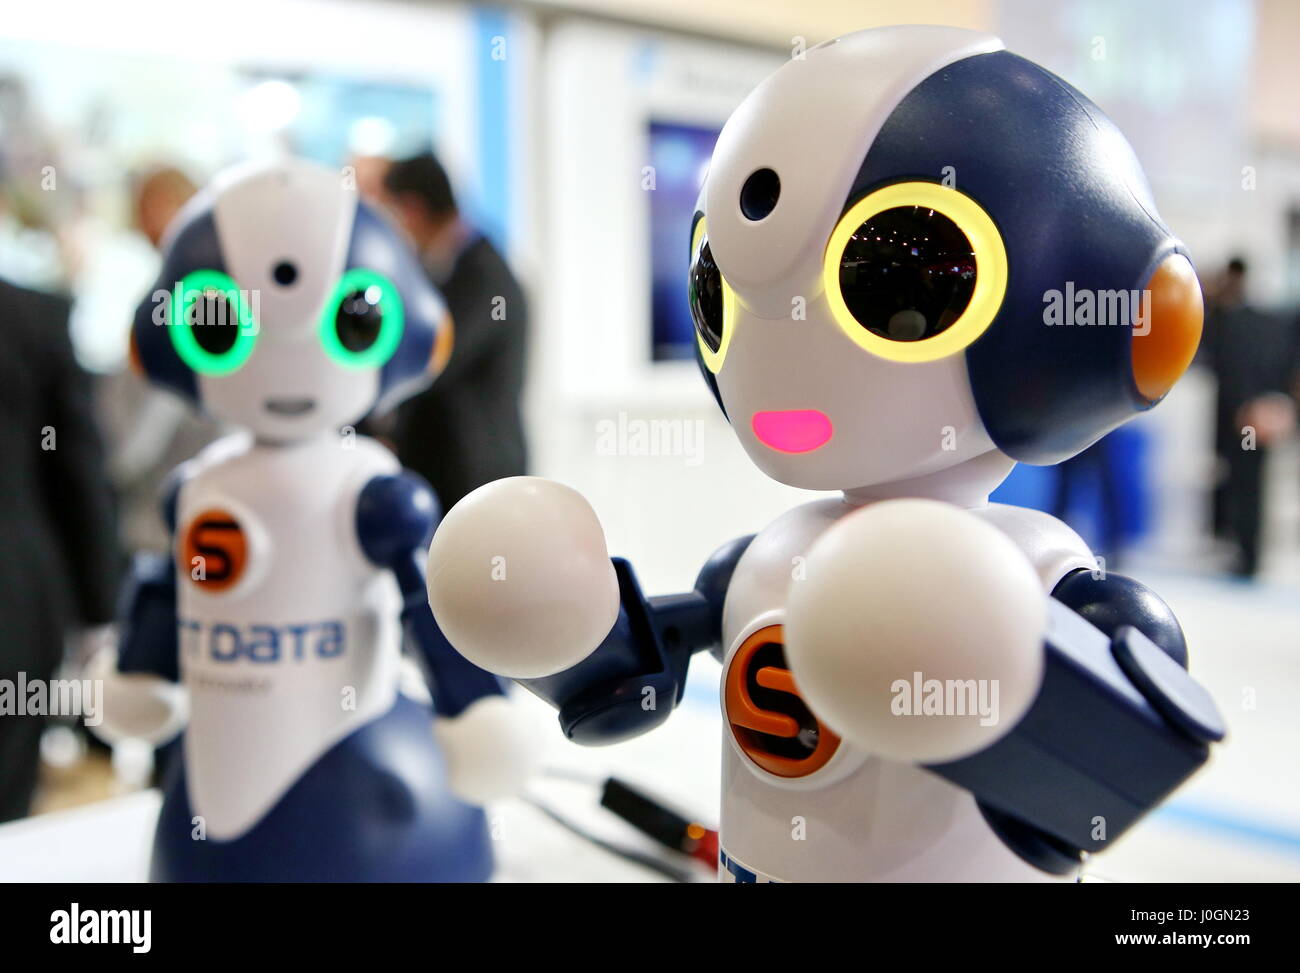 Hanover, Germany. 19th March, 2017. Communication robot 'Sota' (Social Talker) by NTT Group (Nippon Telegraph and Telephone, Japan), its integratetd Natural Interaction Engine combines artificial intelligence technology 'corevo' by NTT Group with Robot Coordination Control Technology 'R-env'. CeBIT 2017, ICT trade fair, lead theme 'd!conomy - no limits'. Photocredit: Christian Lademann Stock Photo